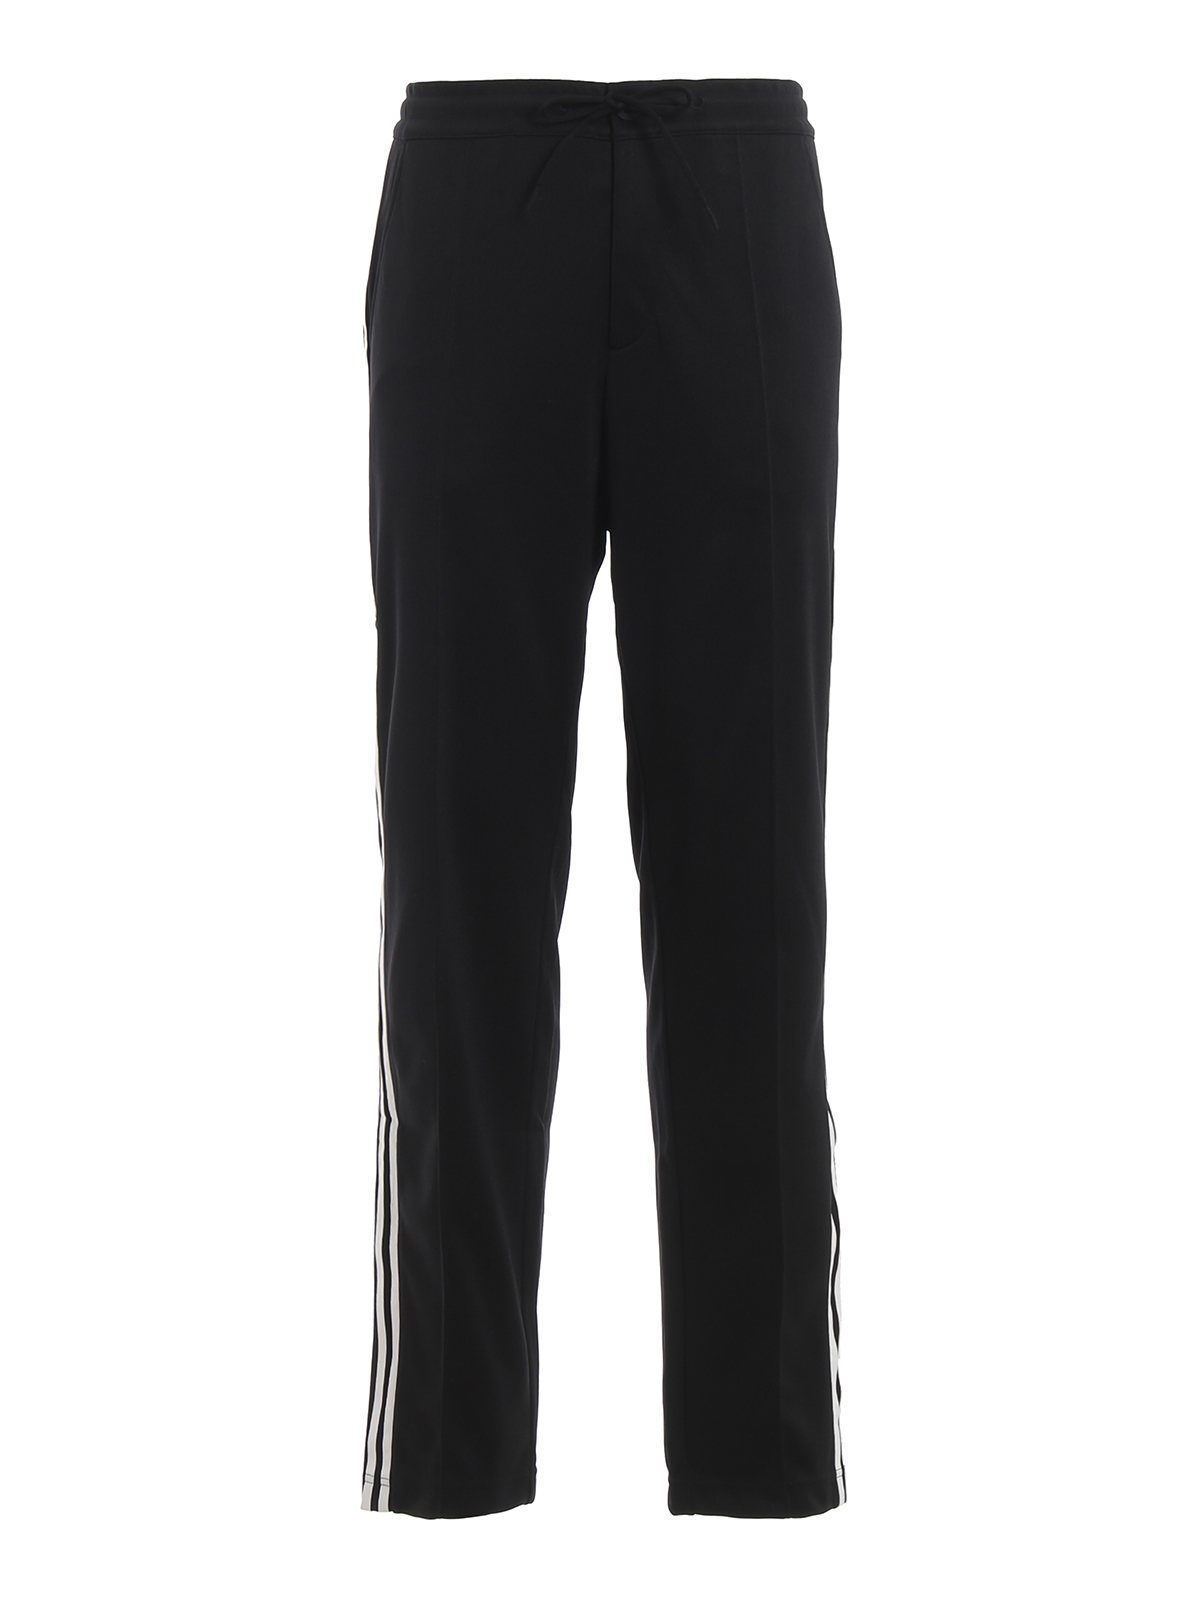 Tracksuit bottoms Adidas Y-3 - M 3S black tracksuit bottoms - DY7295